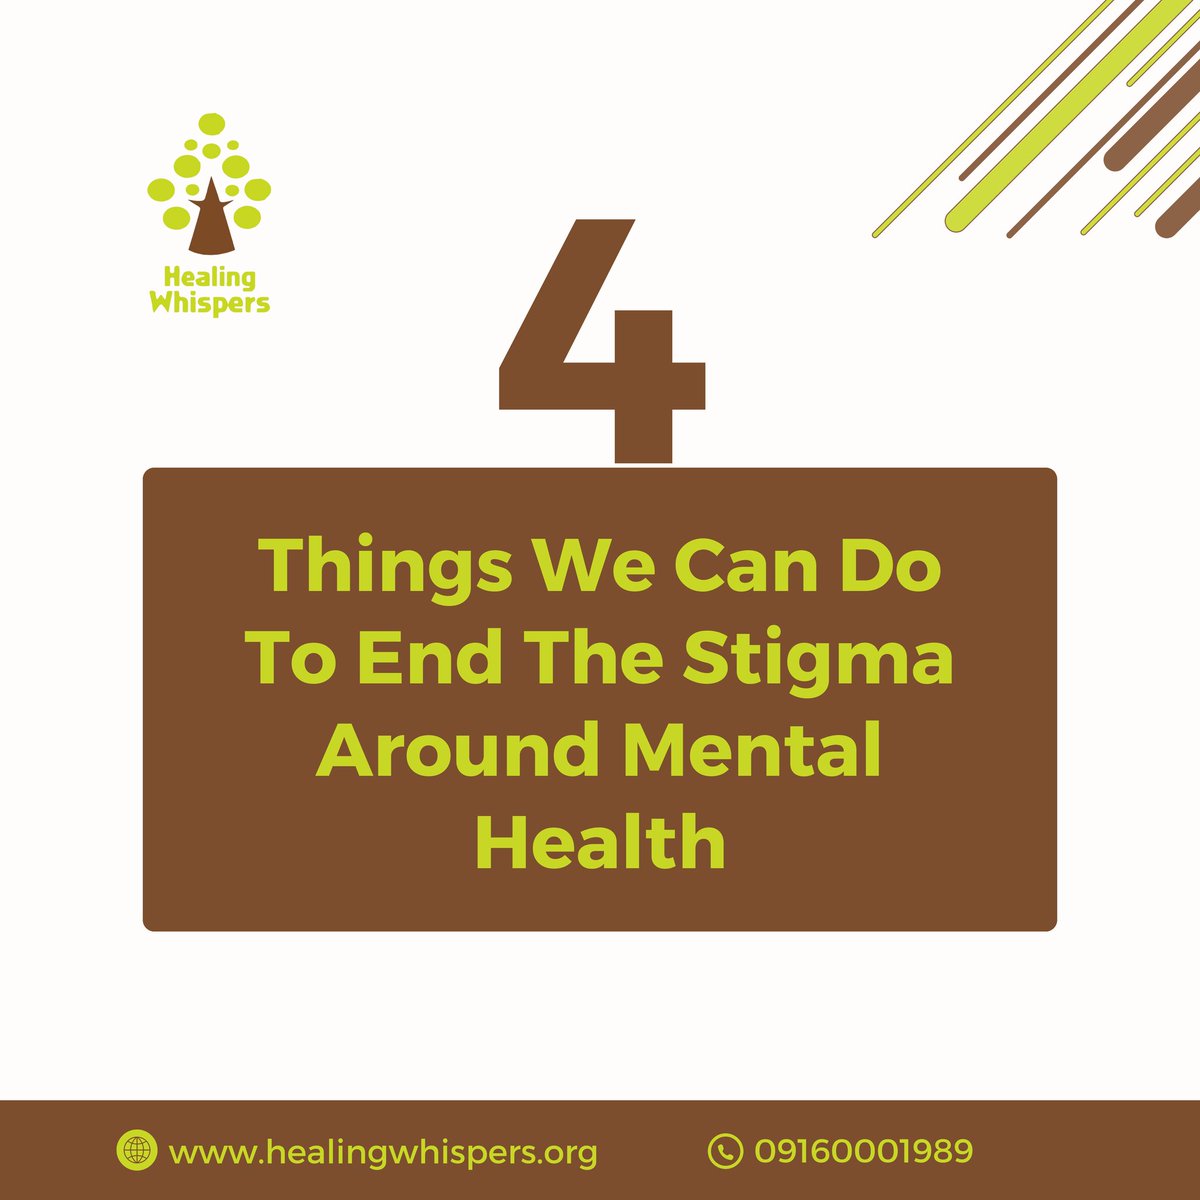 We must end mental health stigma for one crucial reason: it saves lives. 

When stigma fades away, people can reach out, share their struggles, and find the support they need. 

#mentalhealth  #endthestigma